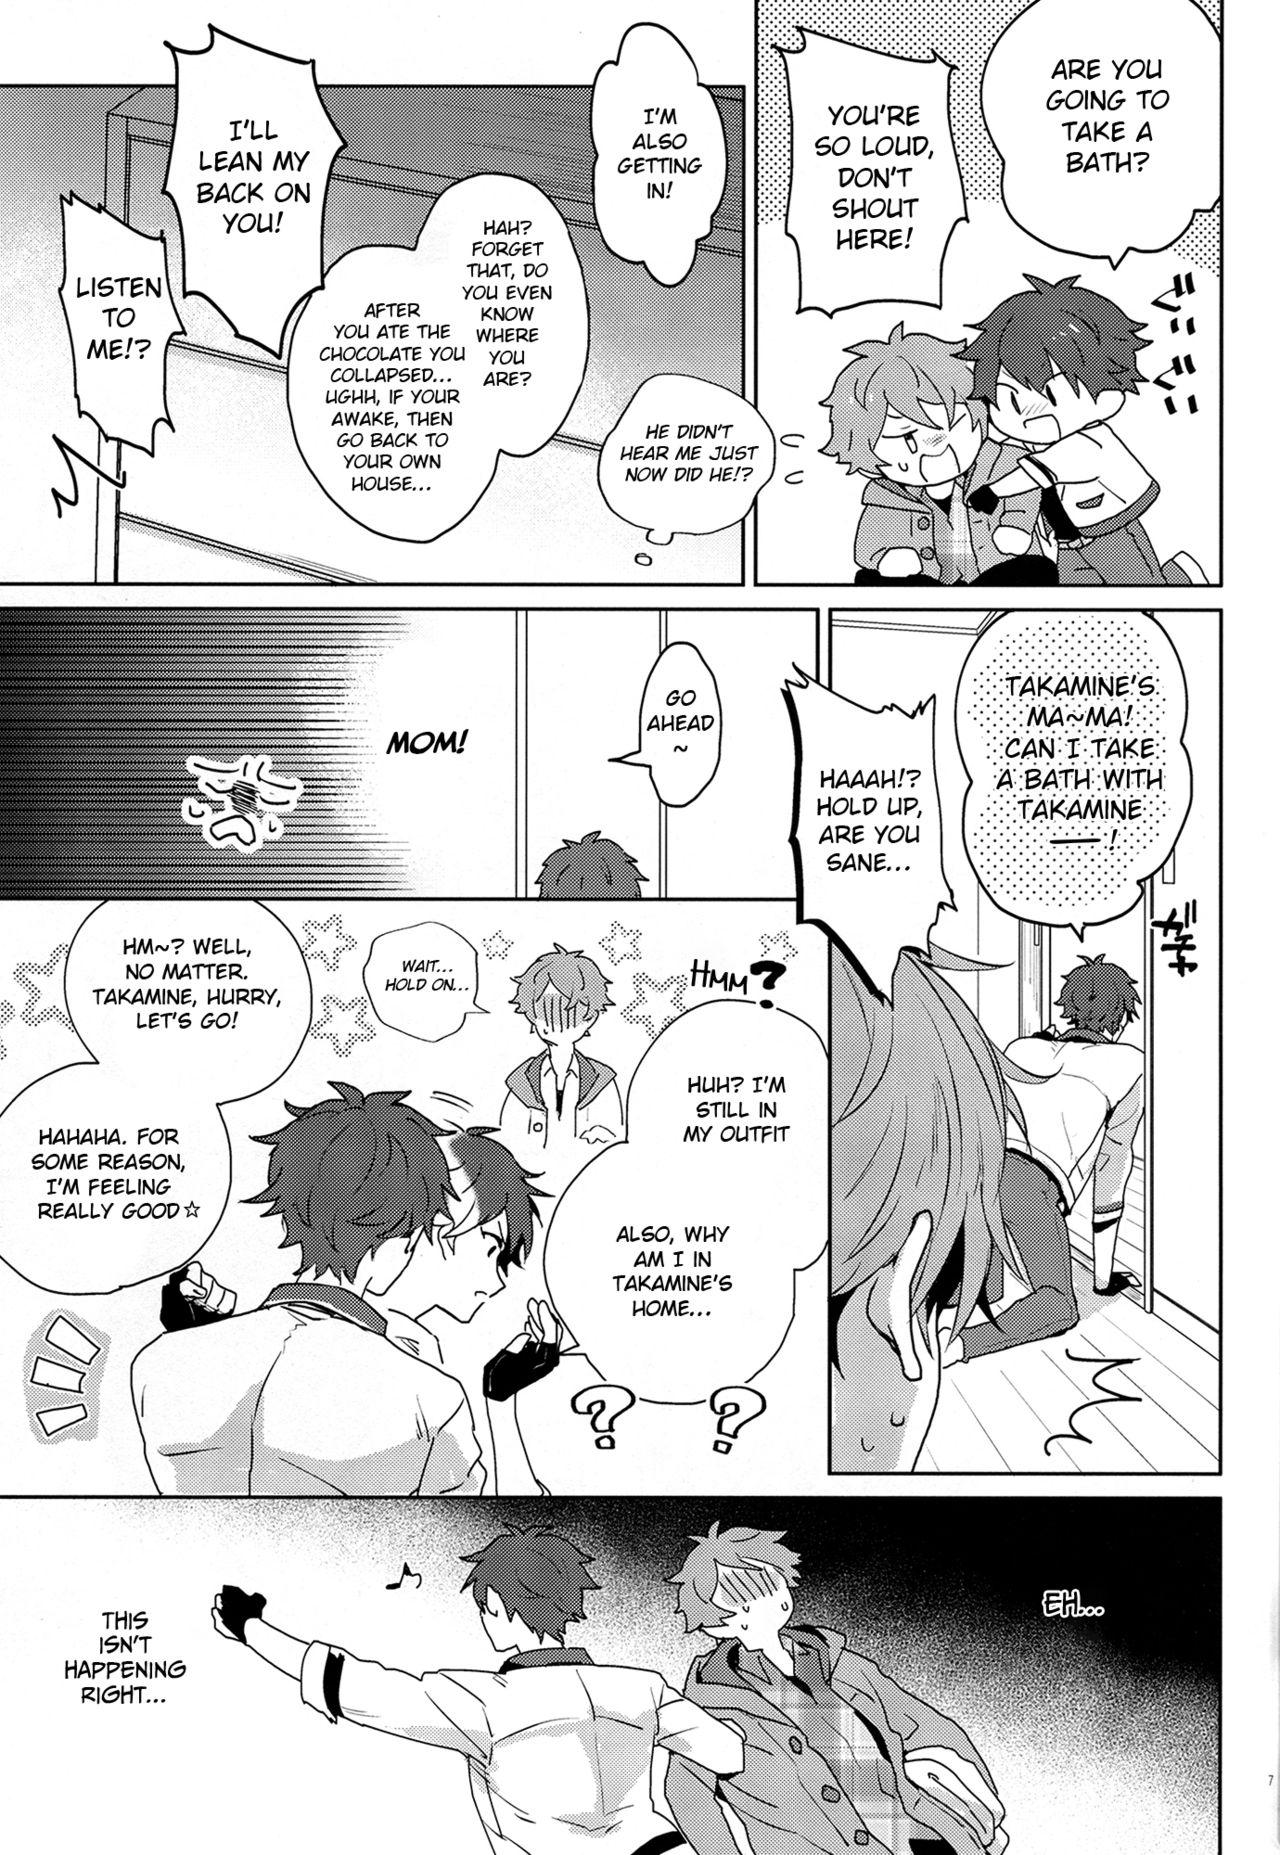 Jerking Off After the Holiday Party! - Ensemble stars Naturaltits - Page 7